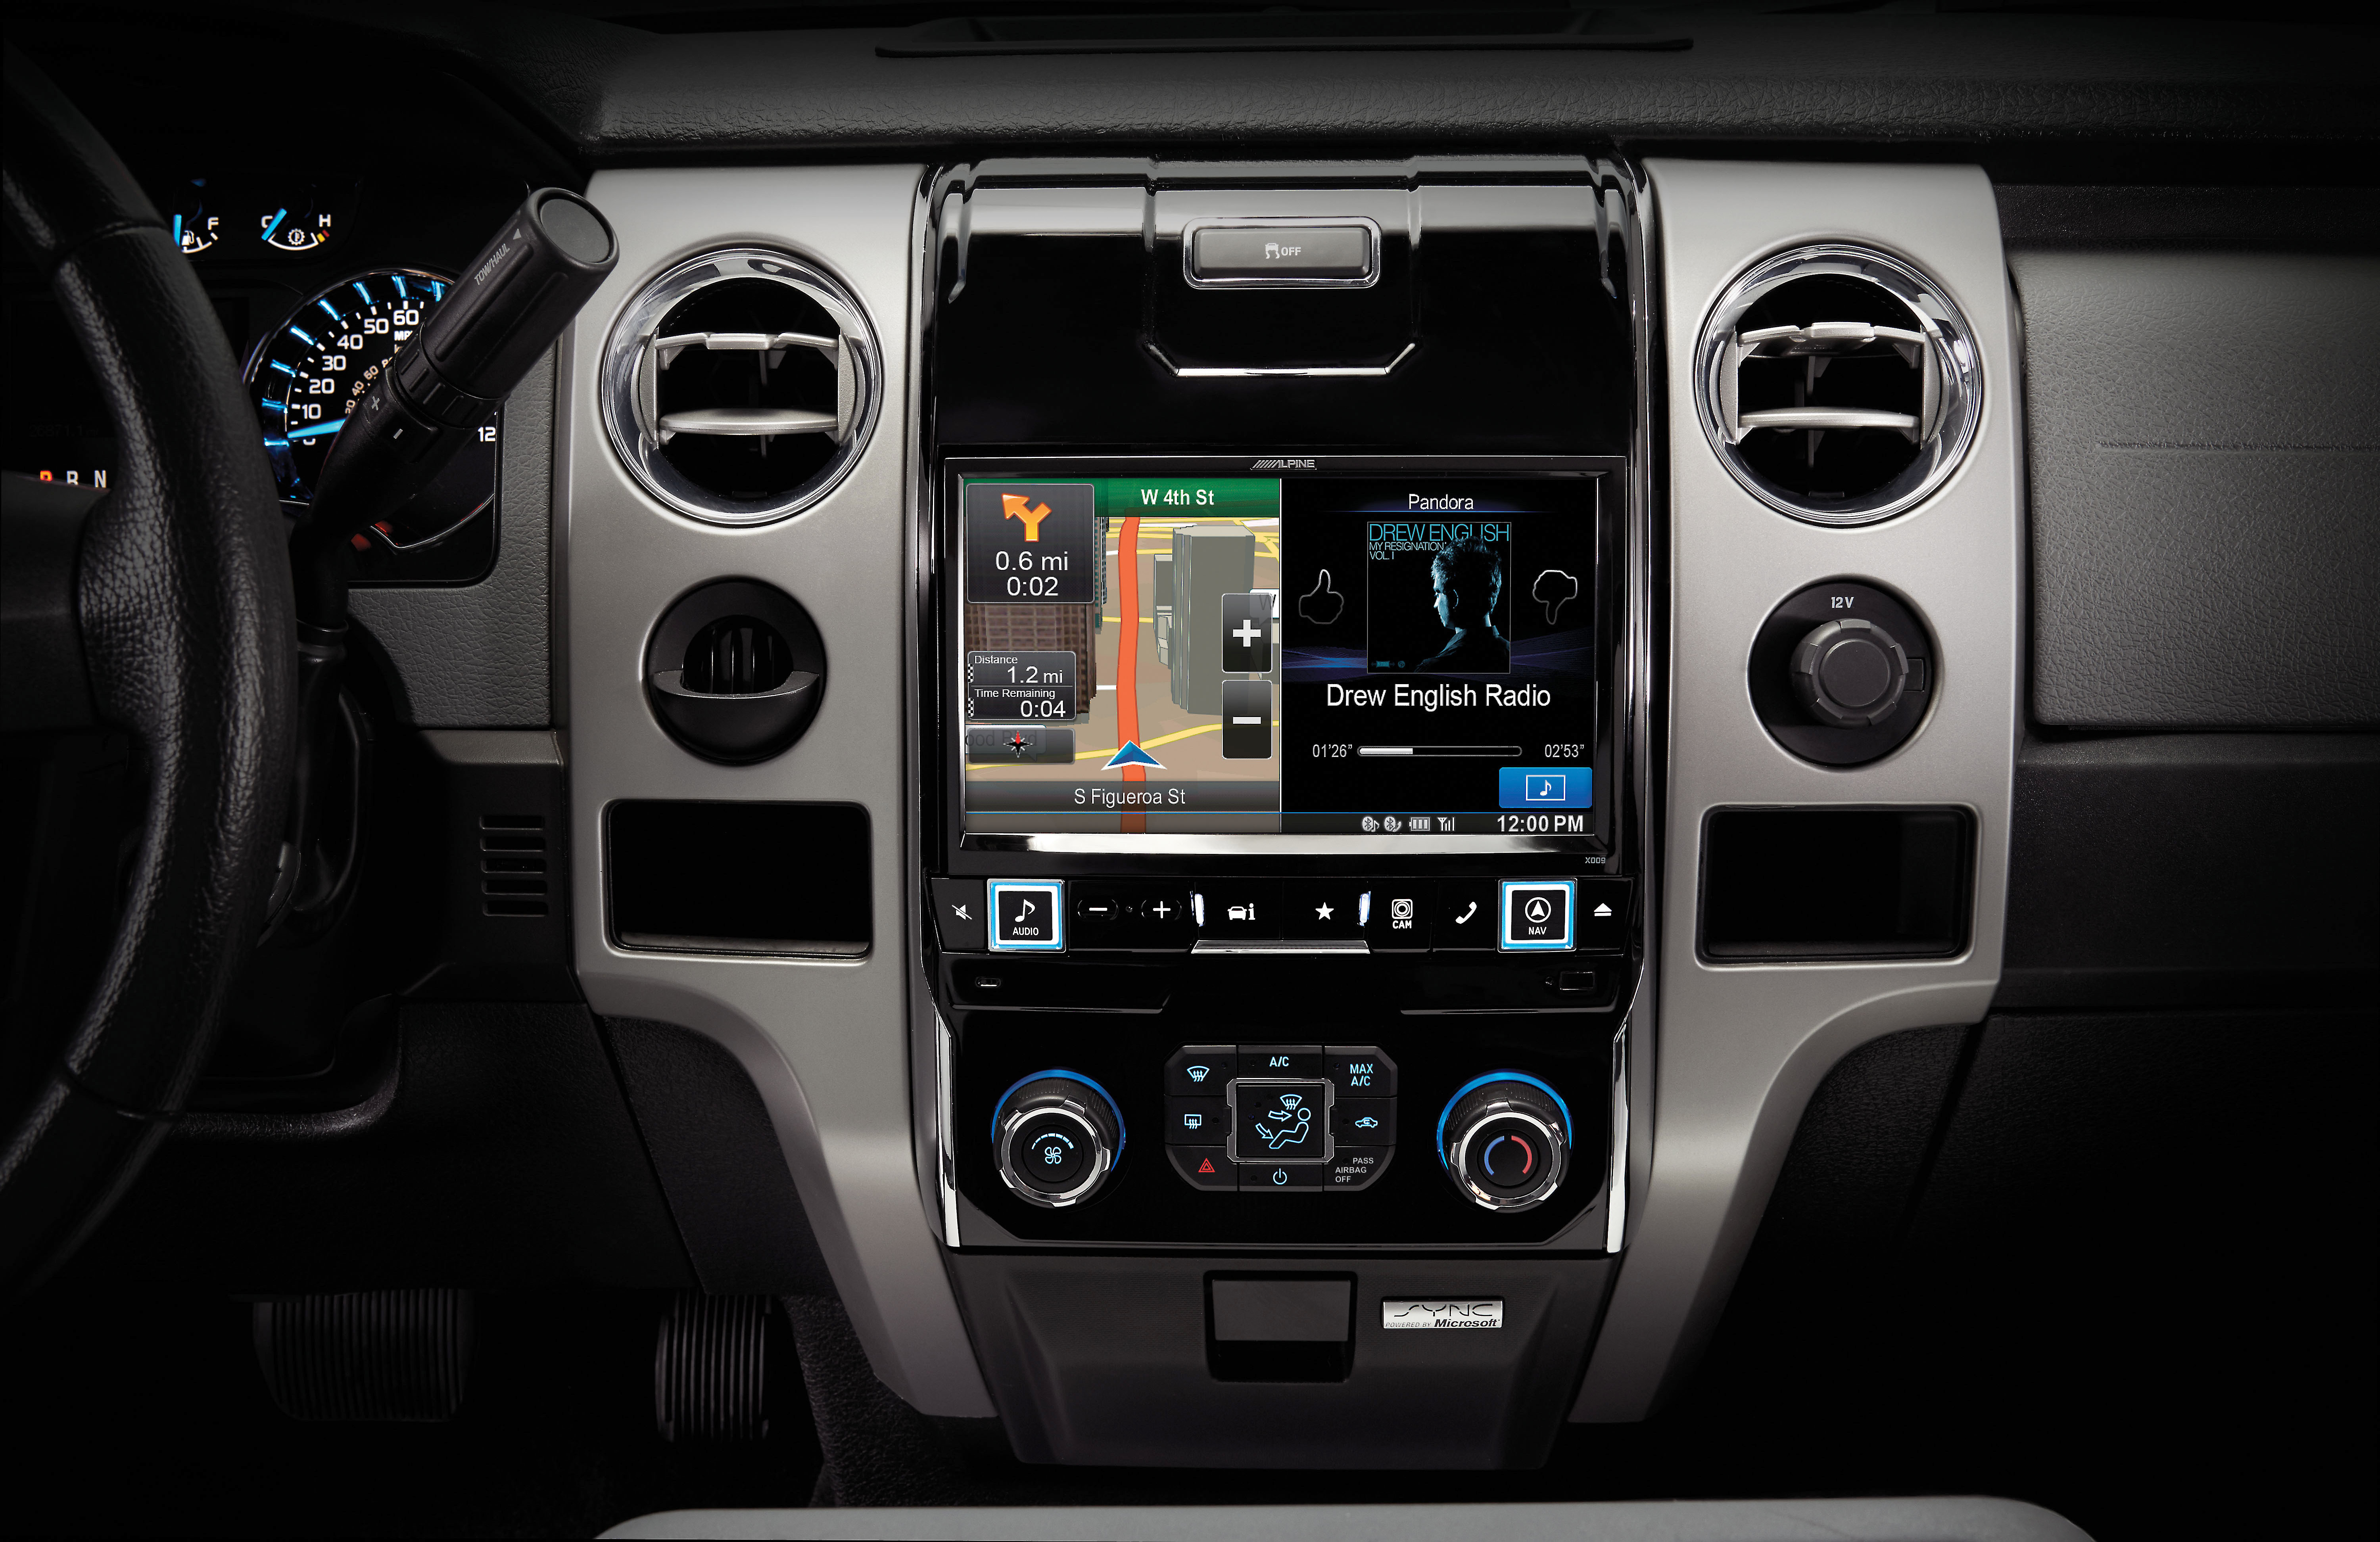 Alpine X009 Fd2 In Dash Restyle System Custom Fit Navigation Receiver With 9 Screen For Select 2009 Up Ford F 150 Models With 4 2 Myford Display At Crutchfield - 100 roblox ids 2019 raptor svt